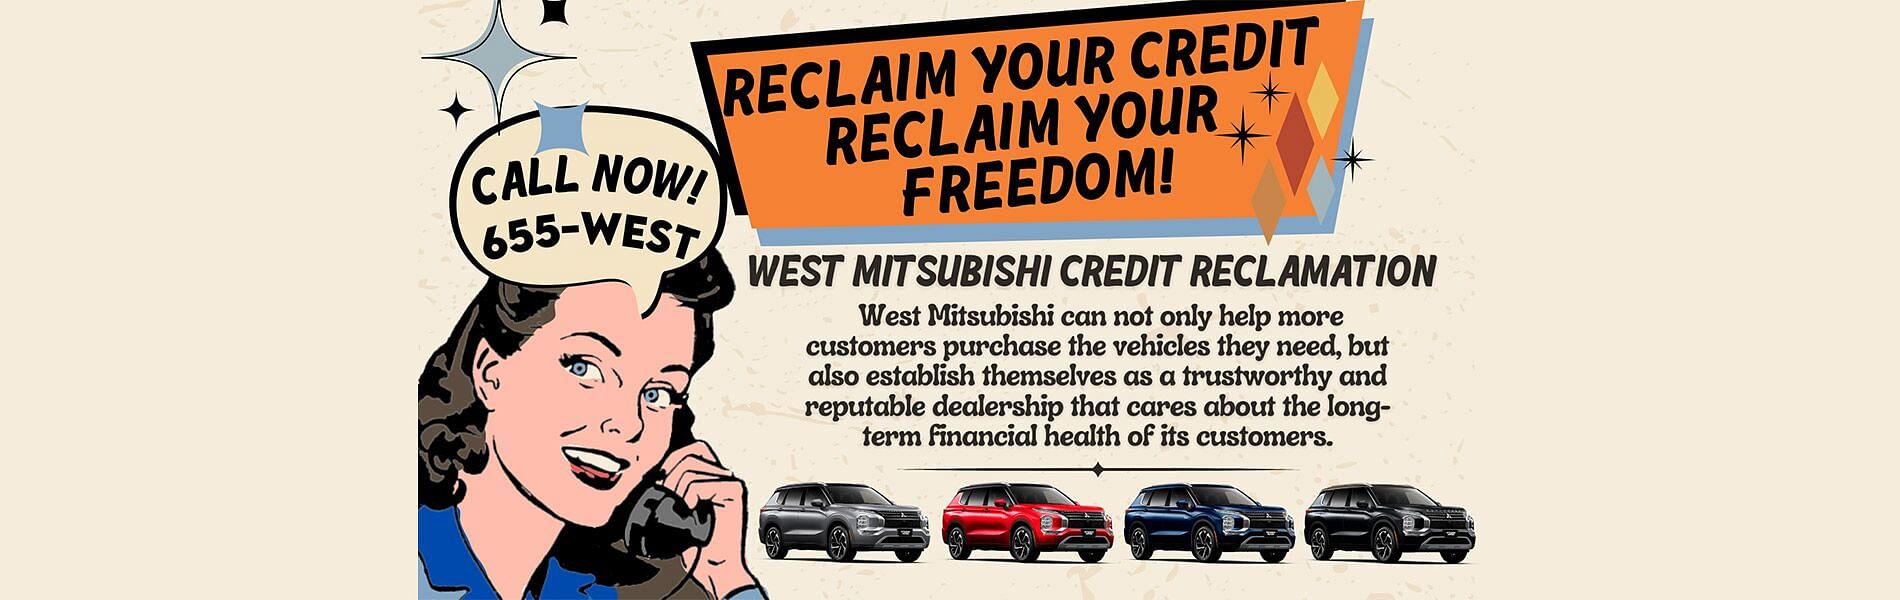 Vintage style banner. On the left a woman a holding phone and saying call now 655-west. On left text RECLAIM YOUR CREDIT RECLAIM YOUR FREEDOM! WEST MITSUBISHI CREDIT RECLAMATION West Mitsubishi com not only help more customers purchase the vehicles they need, but also establish themselves as a trustworthy and reputable dealership that cares about the long-term financial health of its customers. Below four SUV's